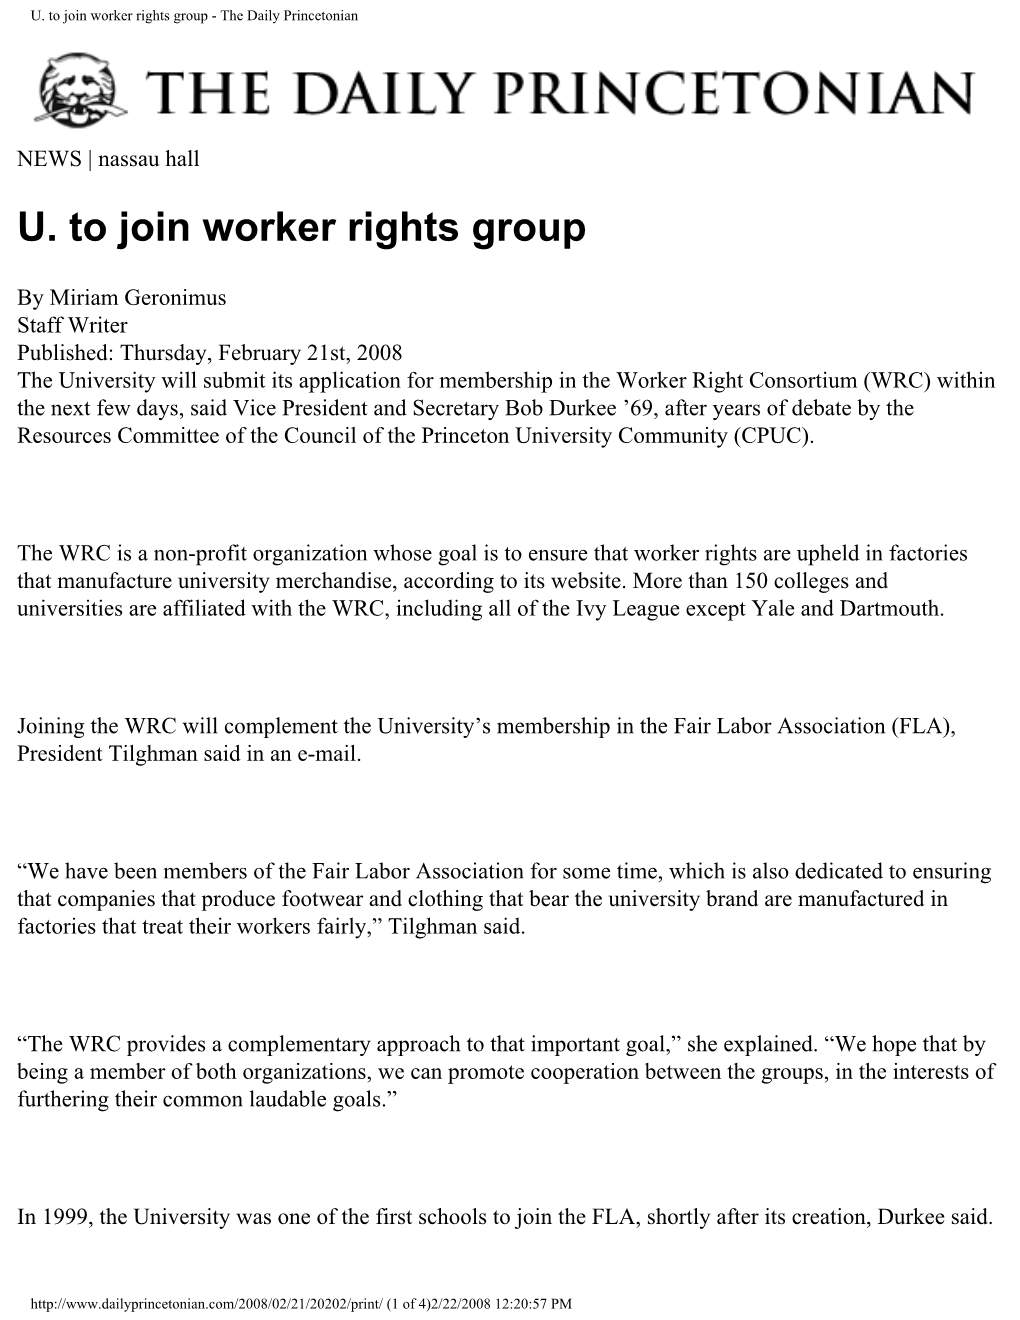 U. to Join Worker Rights Group - the Daily Princetonian